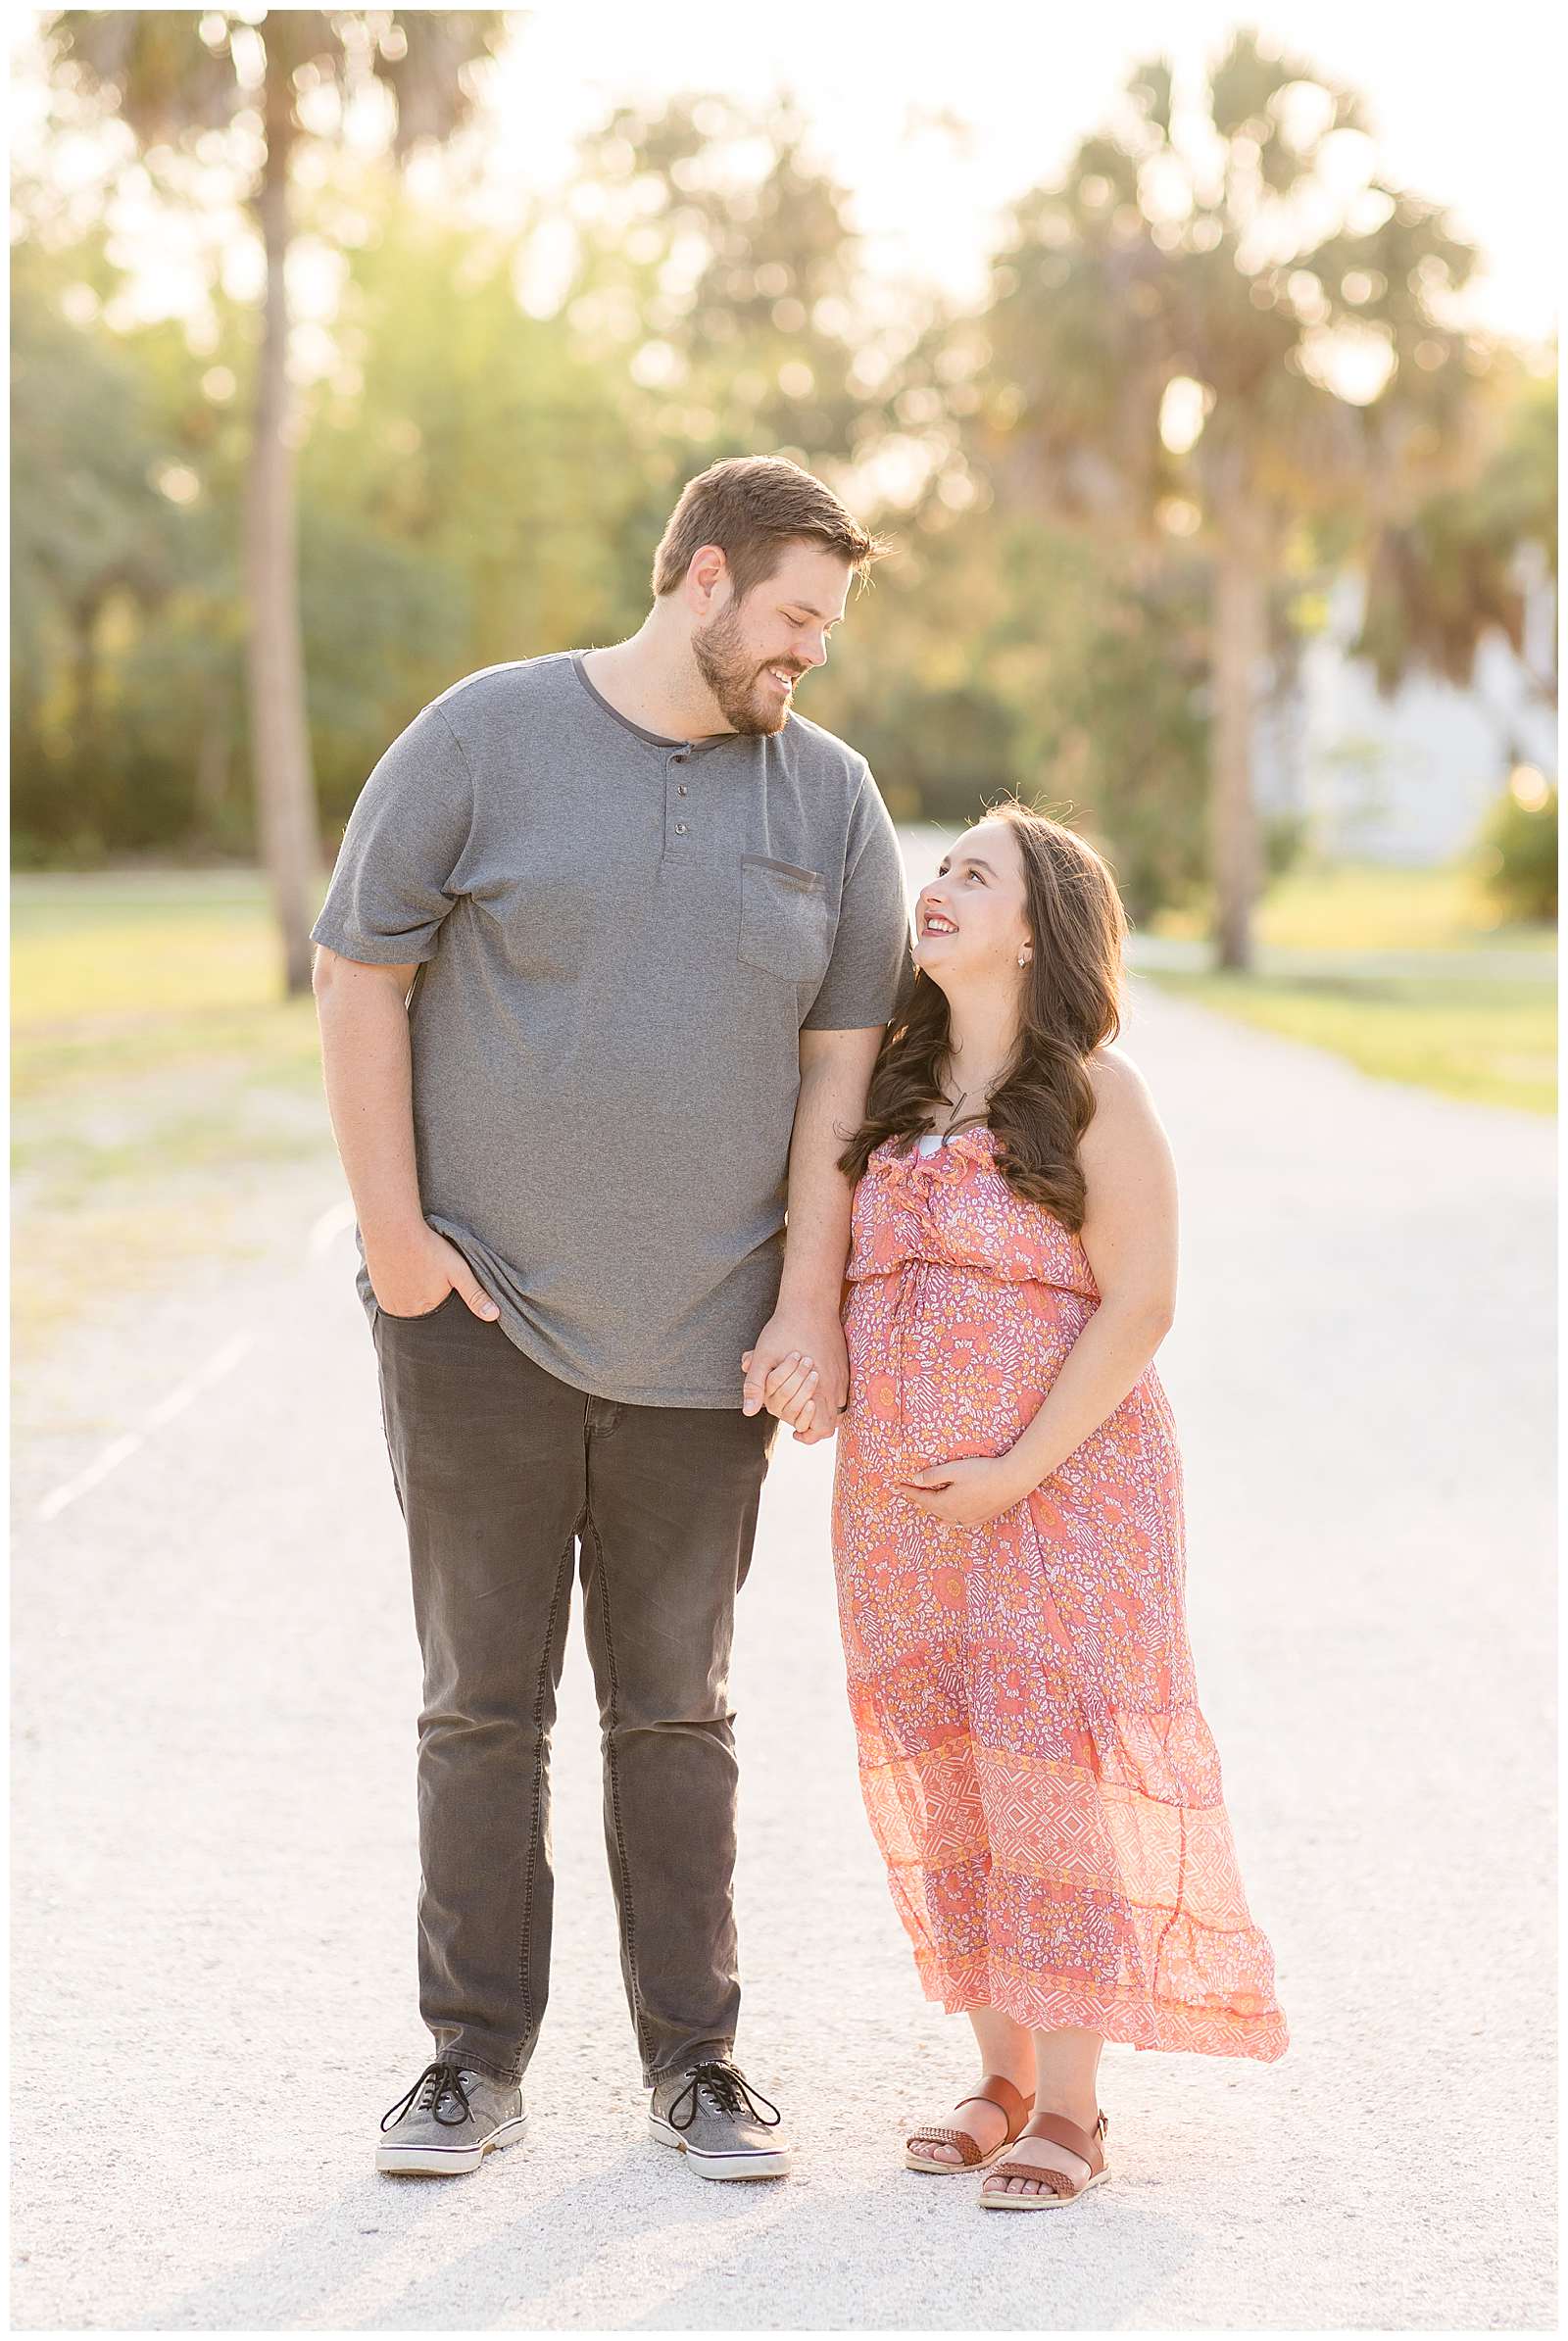 Rebecca Rice Photography captures a BIG height difference maternity session for her Behind the Lens membership.  The husband wears a grey t-shirt and dark grey jeans.  He holds his wife's hand as he looks down at his wife who smiles up at him holding her belly.